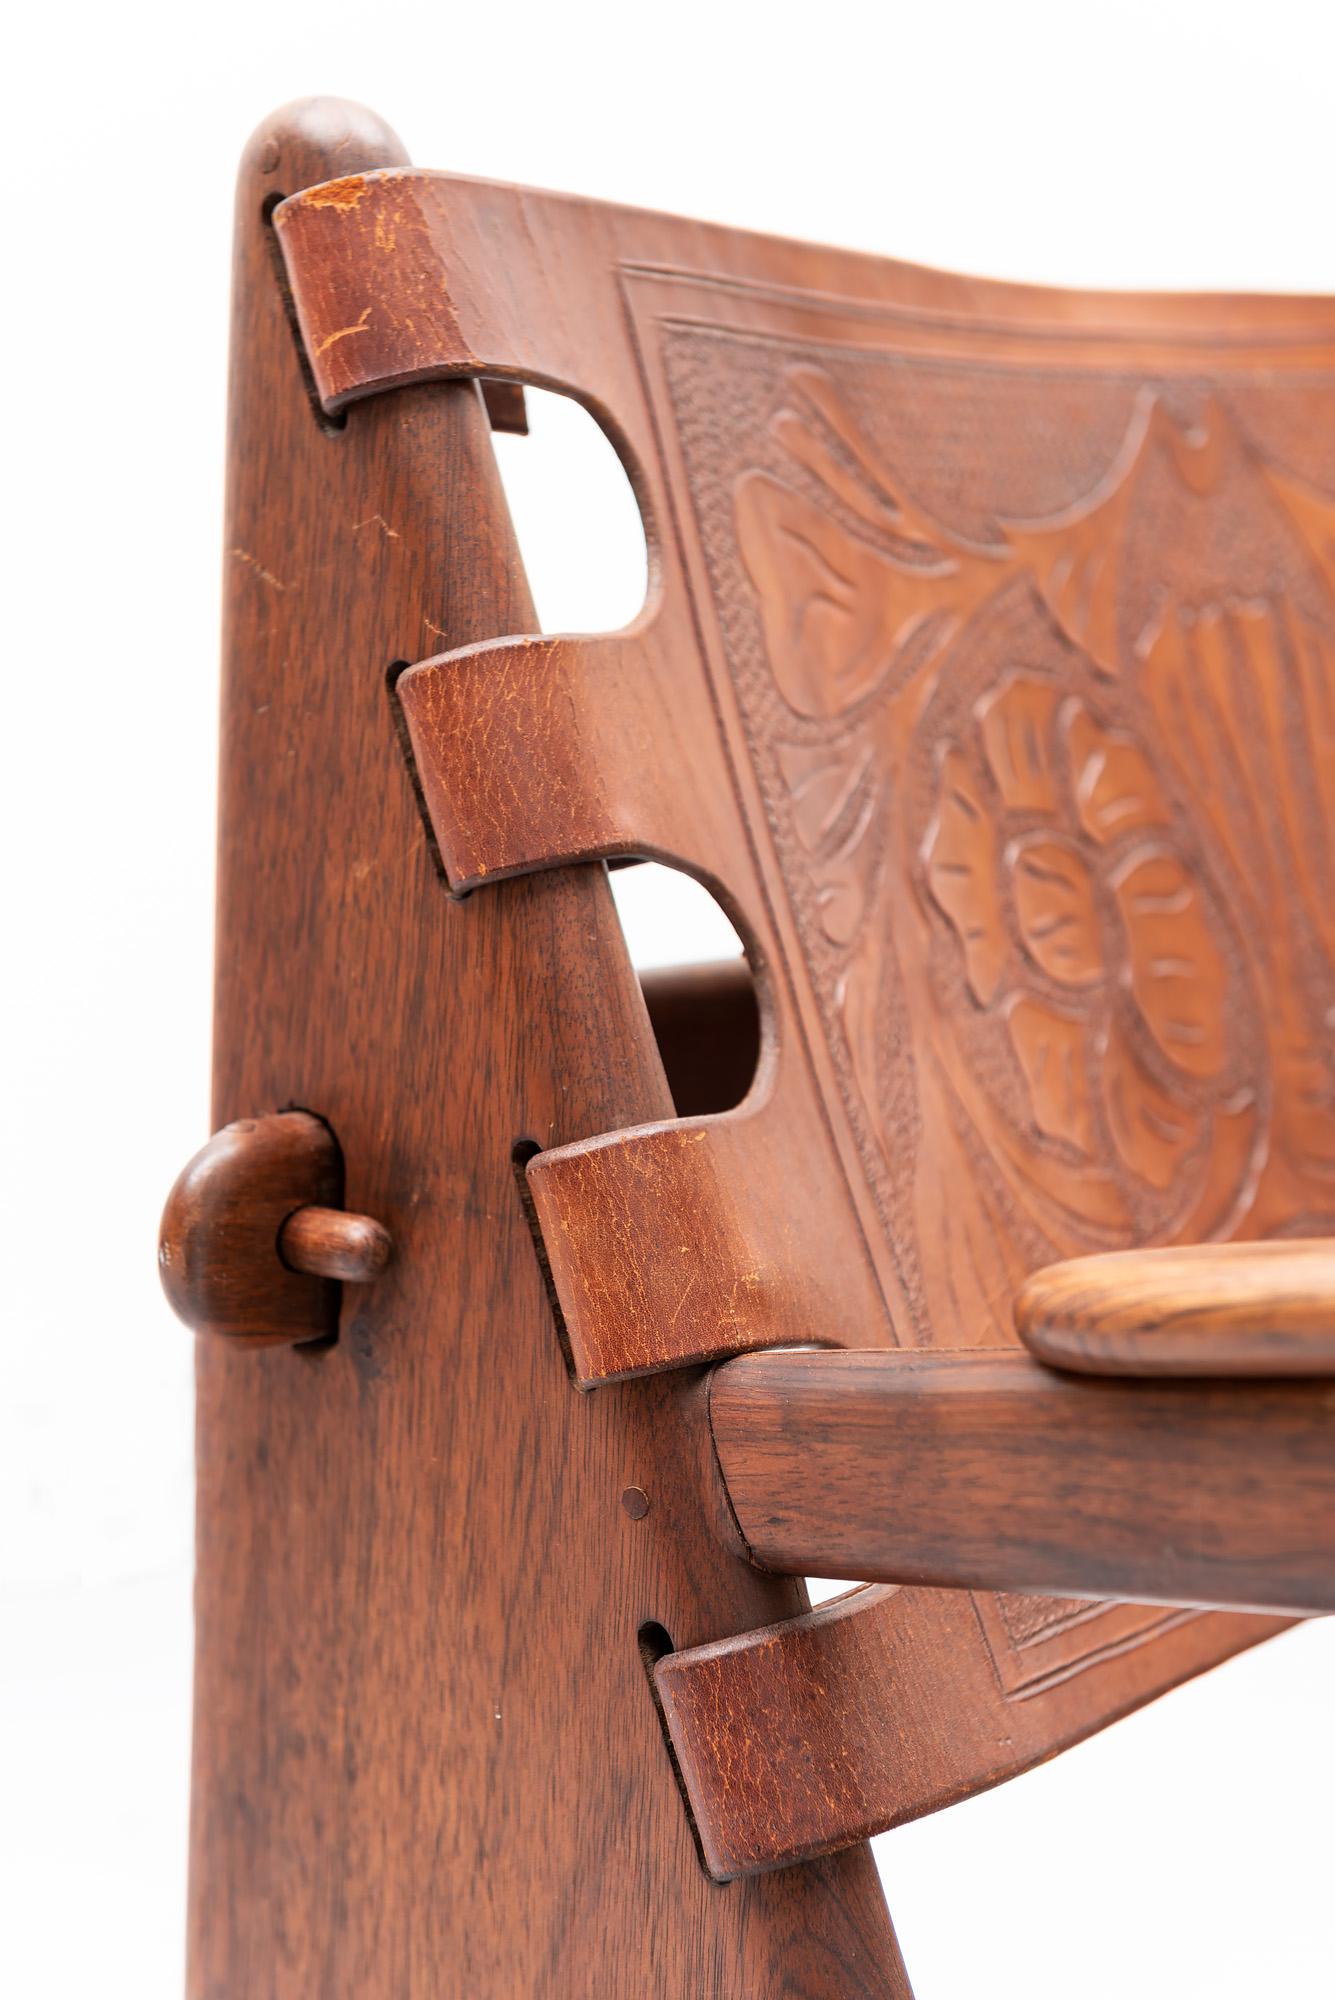 Mid-20th Century Rosewood and Leather Rocker by Angel Pazmino, Ecuador, 1960s